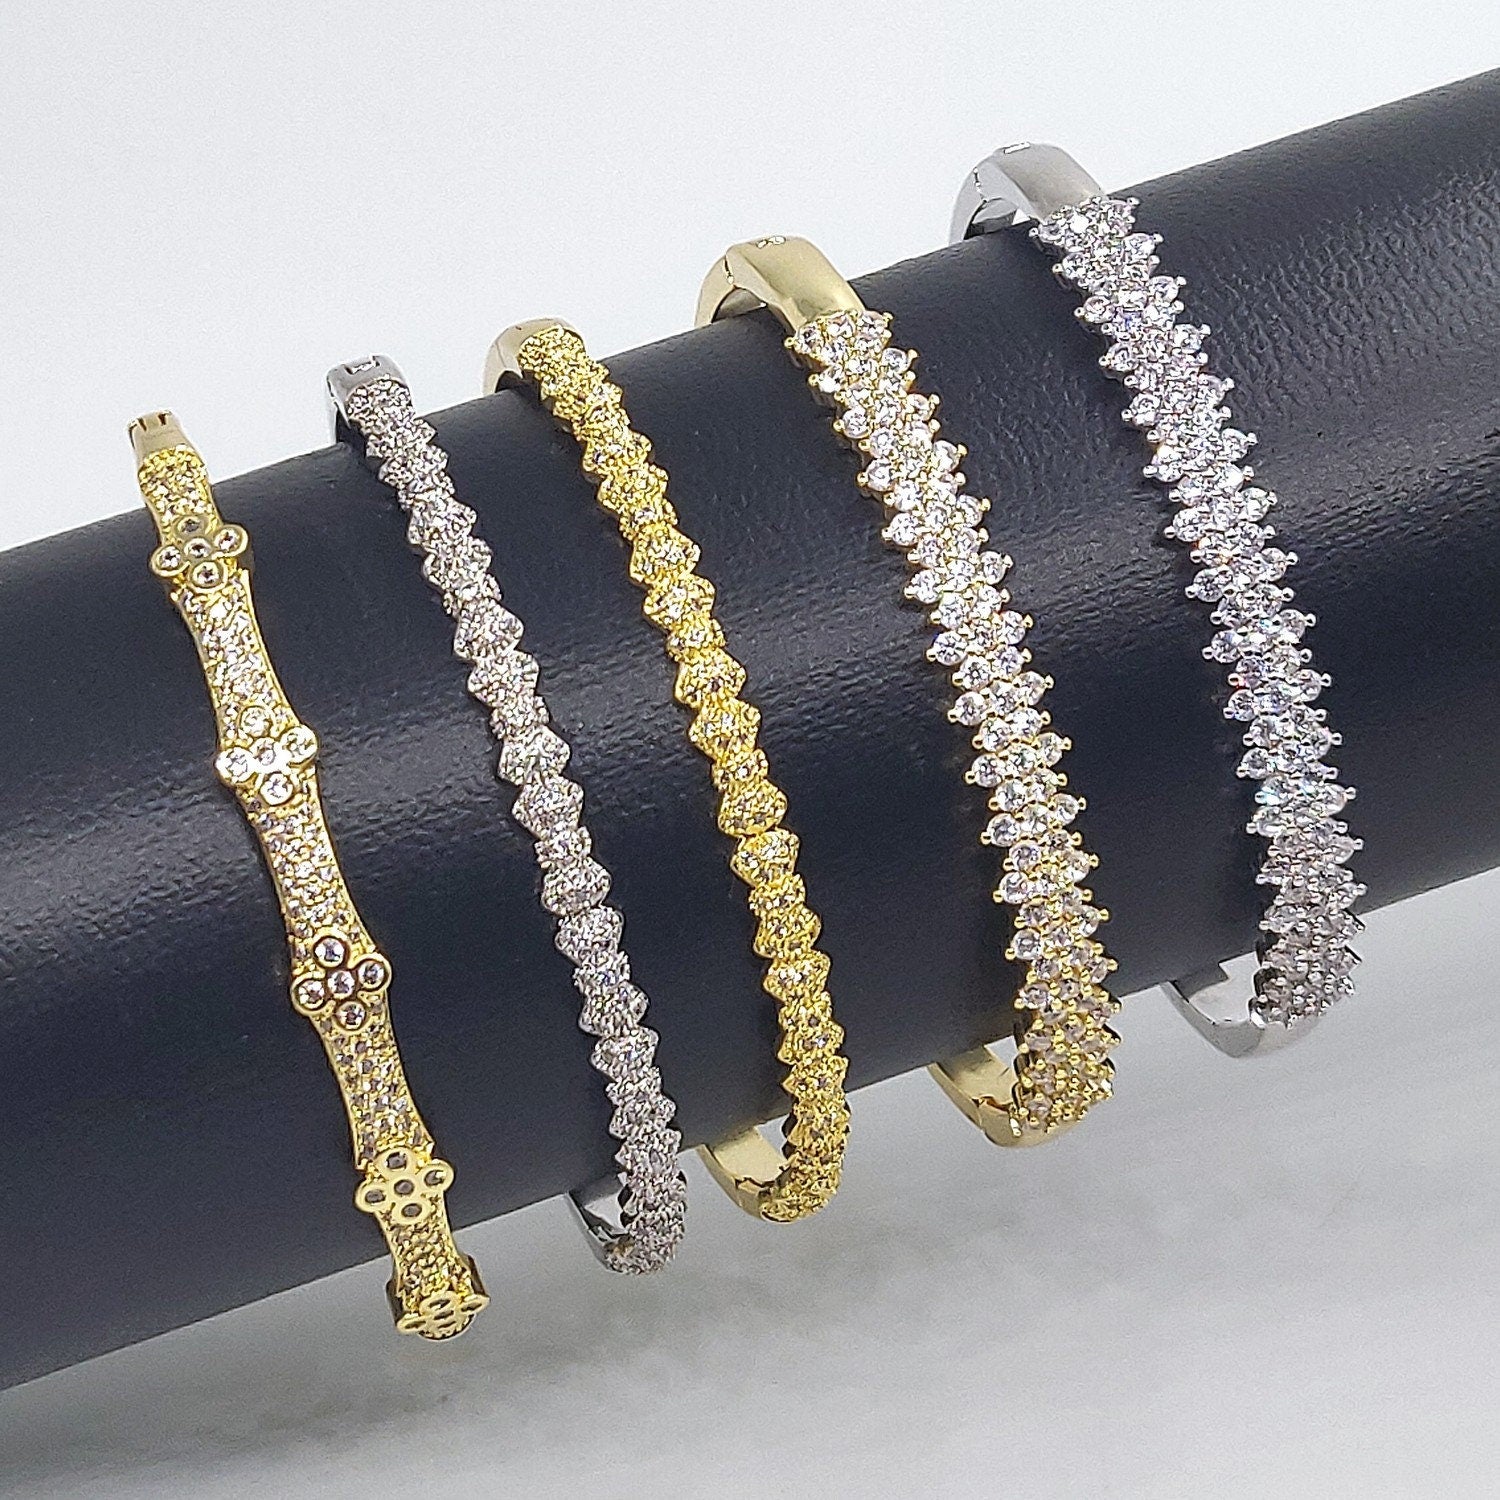 Cubic Zirconia Bracelets for Women, CZ Micro Pave 14 K Gold or White Gold Rhodium Stacking Cuff Bangles, Open/Closes